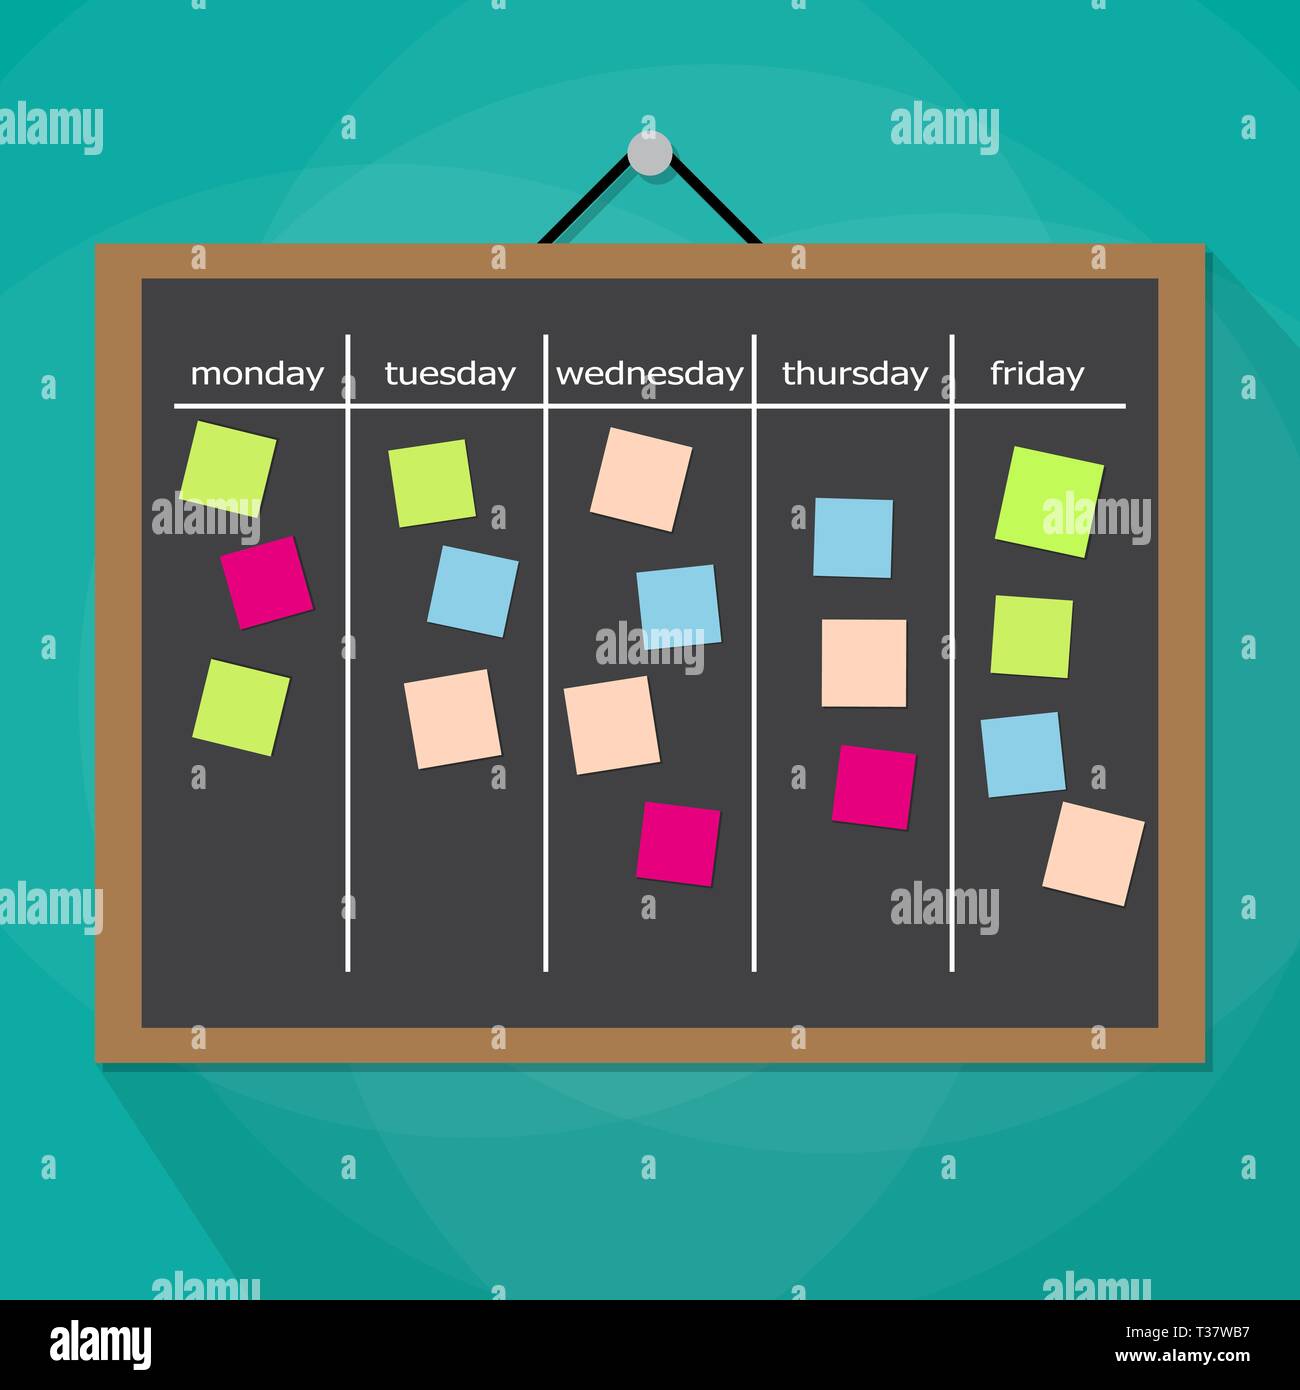 Scrum task board hanging on wall full of tasks on sticky note cards. Development, team work, agenda, to do list. vector illustration in flat style on  Stock Vector